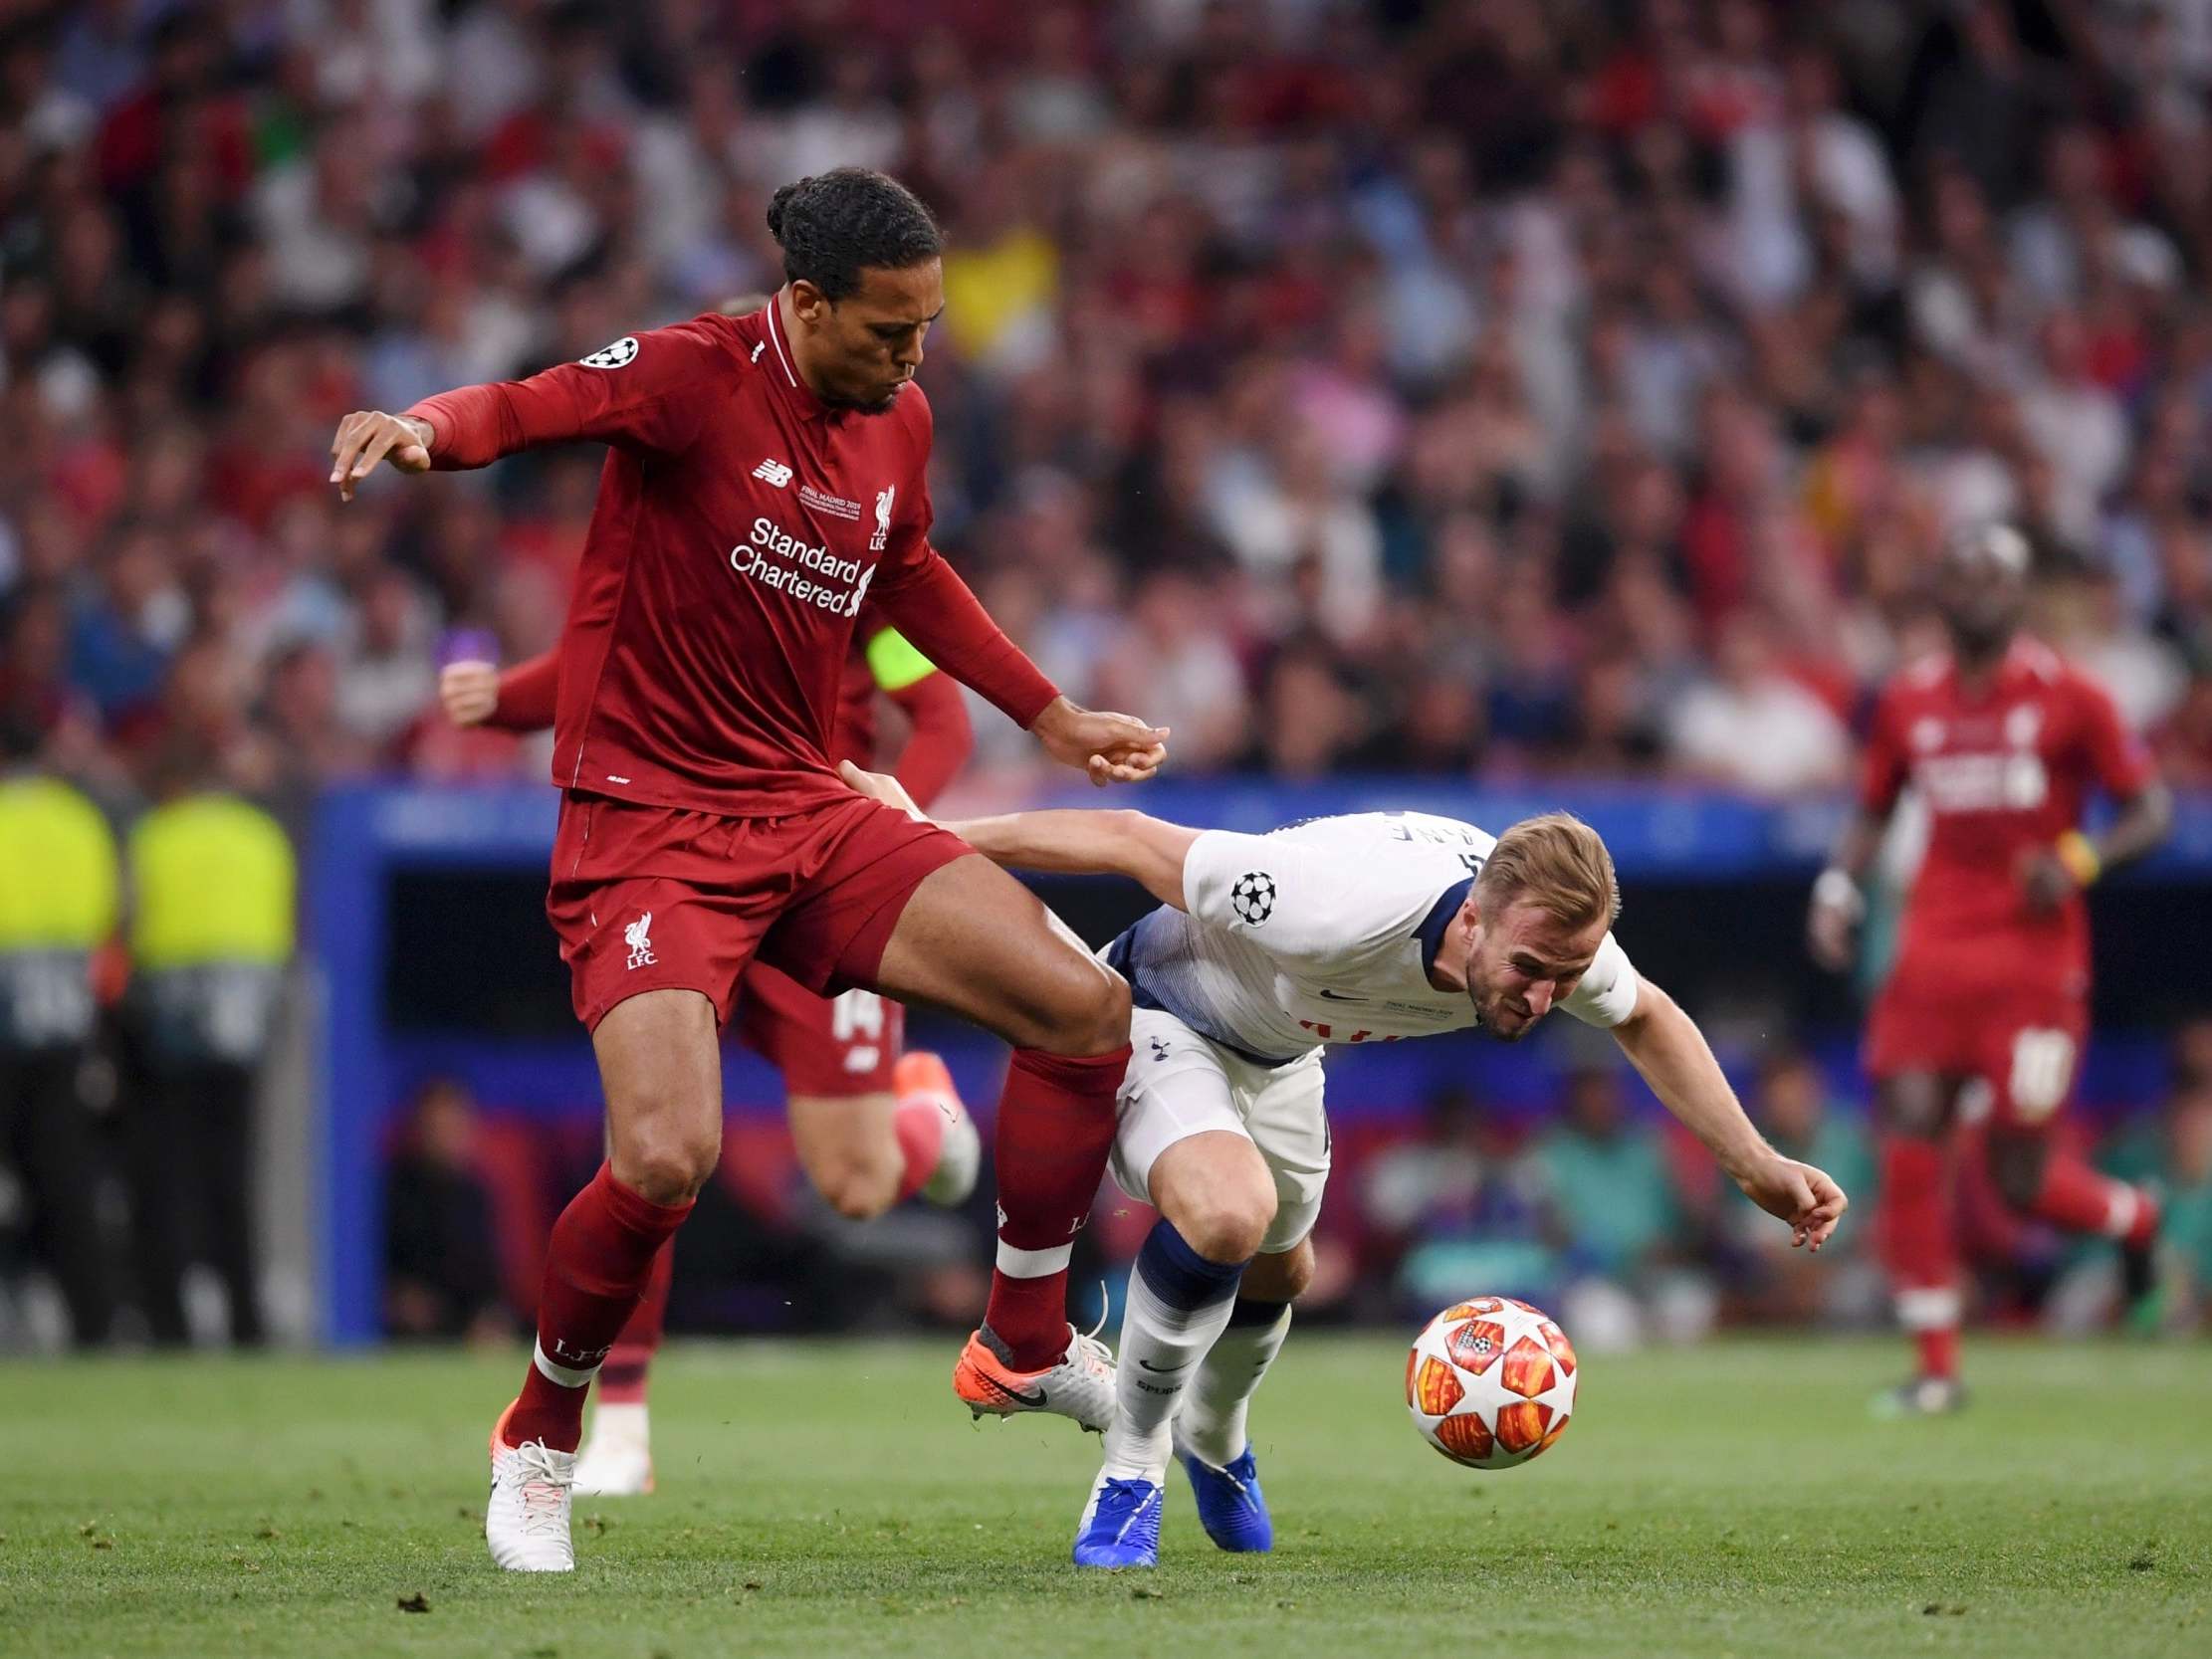 Van Dijk jostles Harry Kane for the ball in the Champions League final